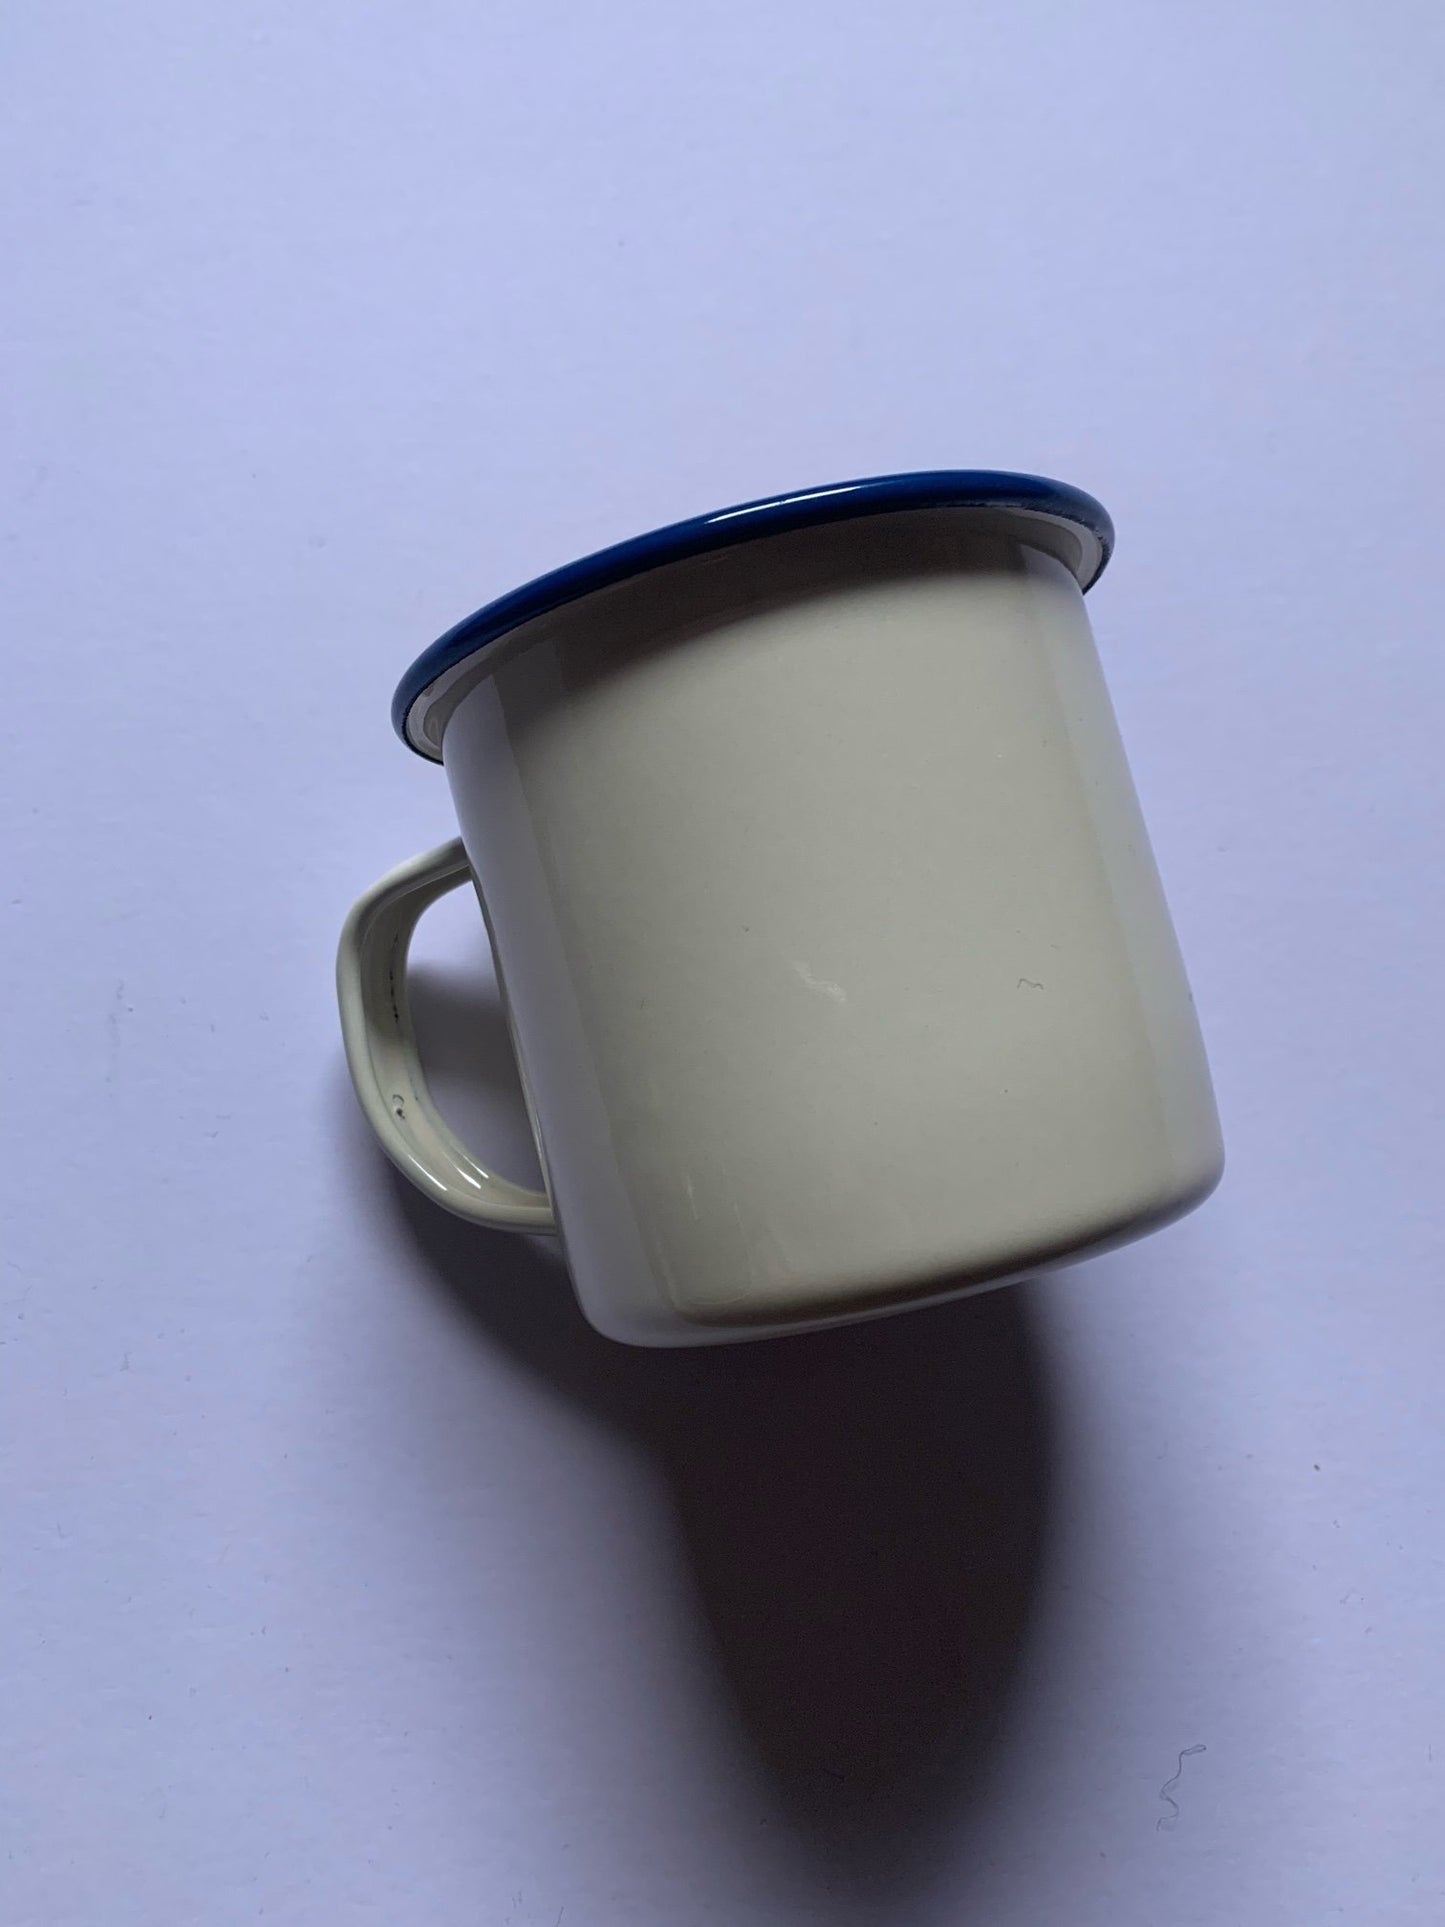 White enamelware mug which is durable, practical and travels well. Iconic, aesthetic and practical, it's the perfect cup for your morning brew, whether at home or out on the trail, and the look fits well into any homestead, making a great gift for those newly renting or home-owning. 